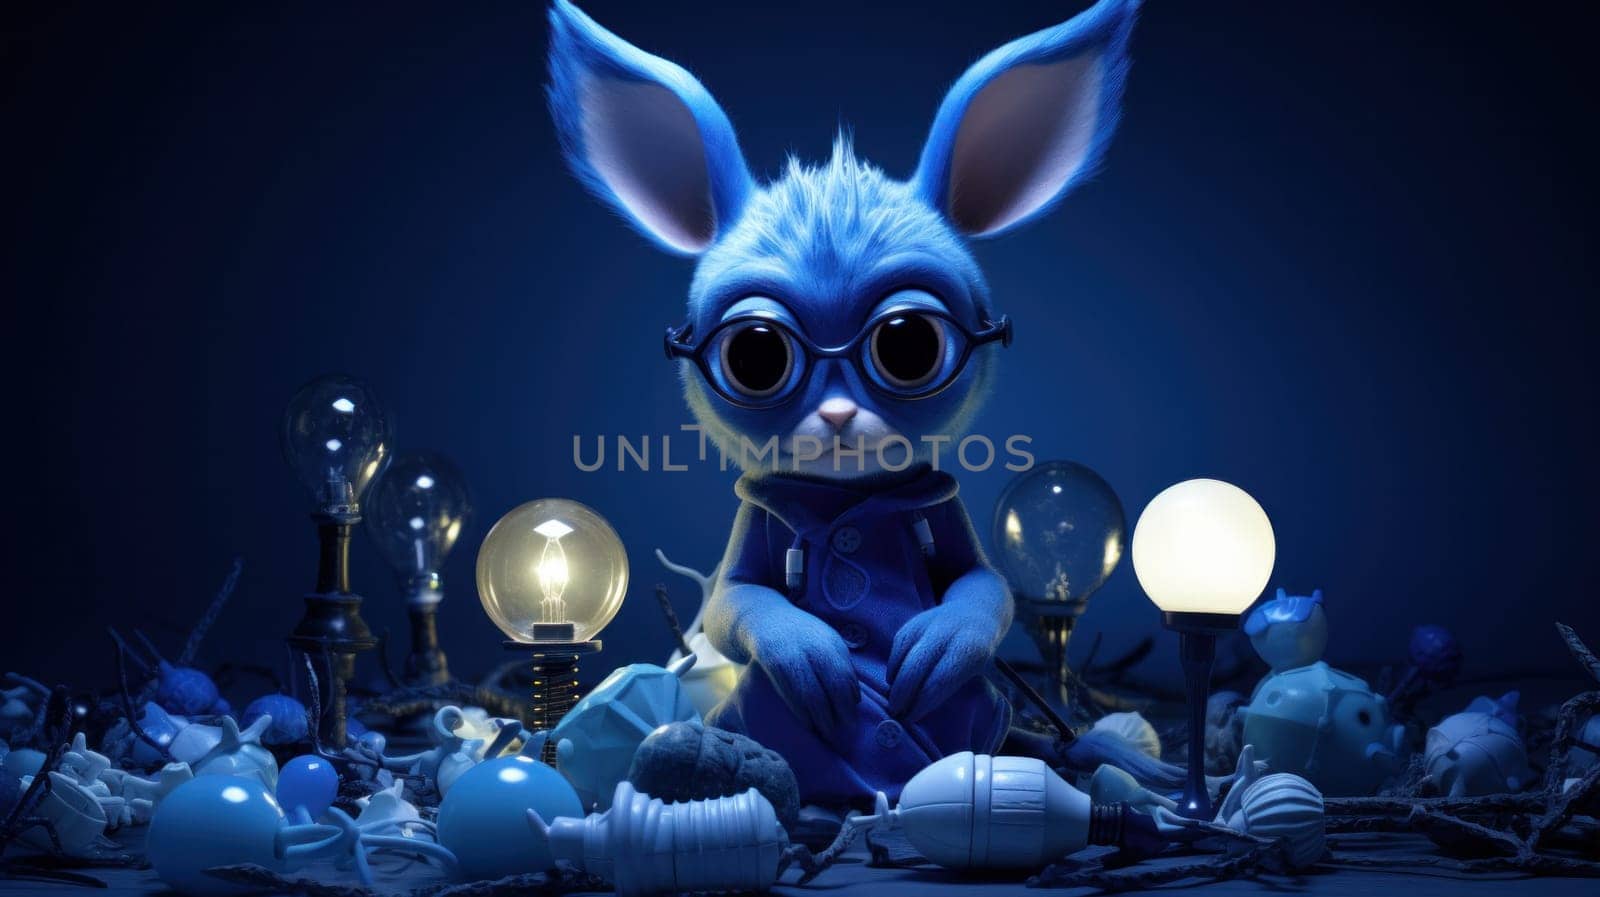 A blue rabbit with glasses sitting in a dark room surrounded by light bulbs